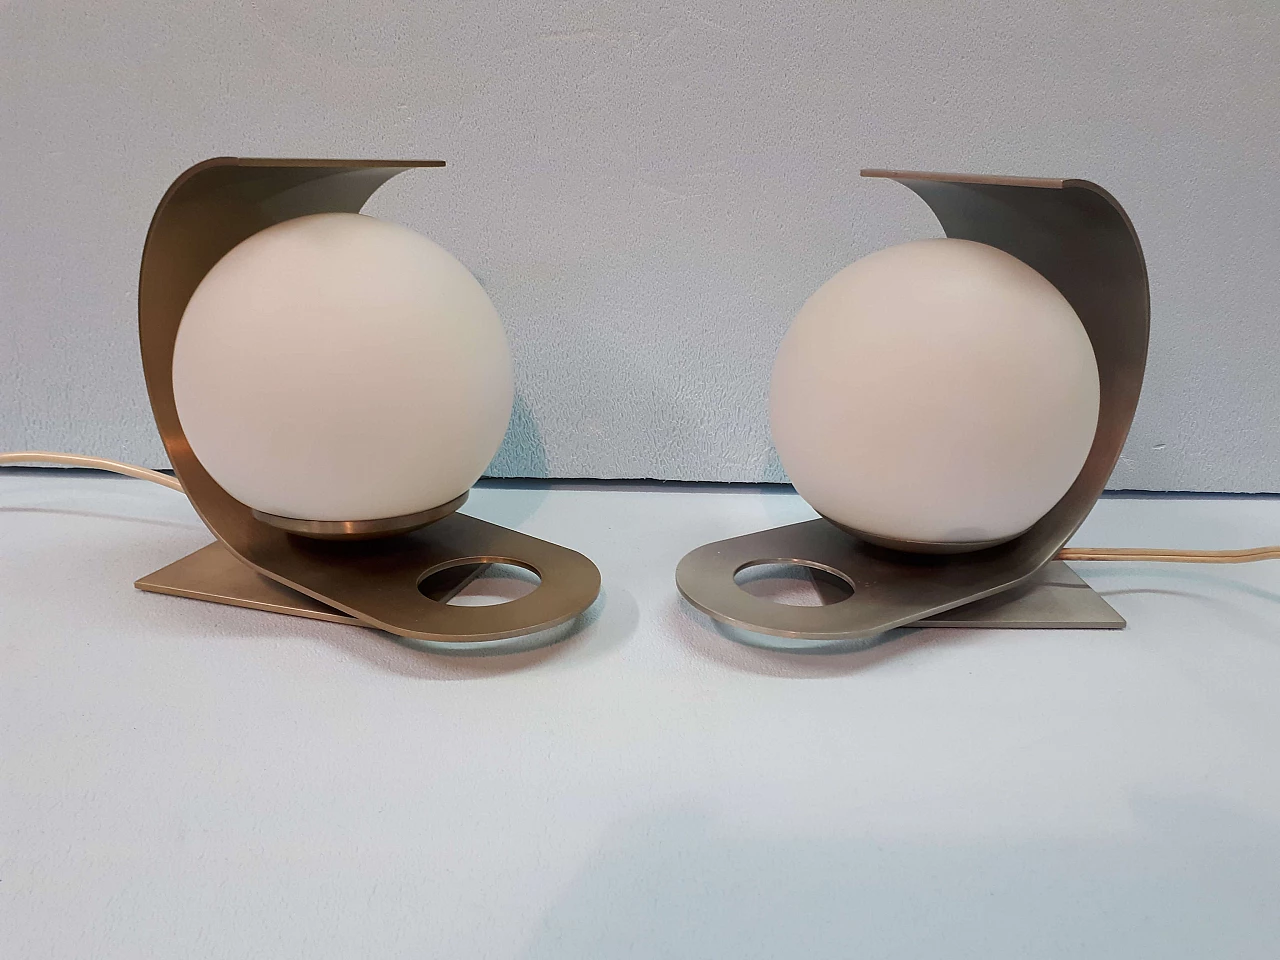 Pair of table lamps in satin-finish aluminium by Pia Guidetti Crippa for Lumi, 70s 1215211